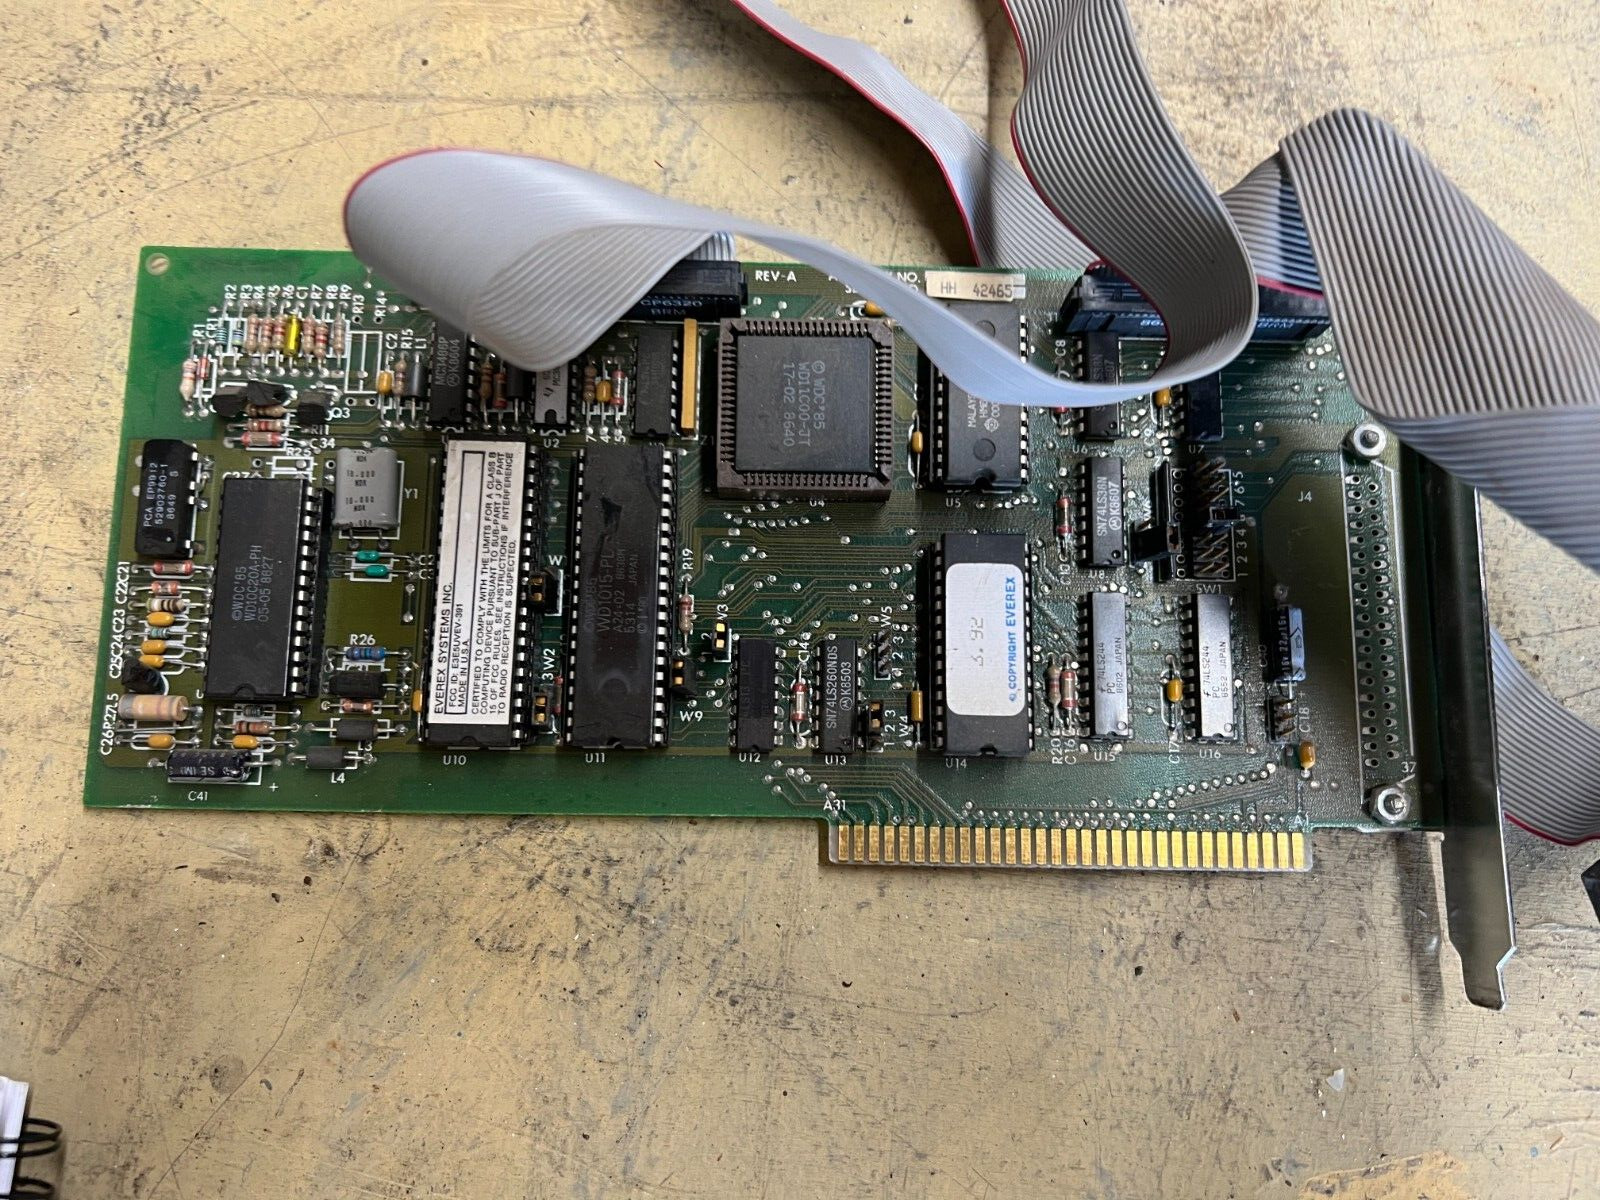 EVEREX SYSTEMS EV-391 8-bit ISA MFM Disk Controller Card for IBM PC XT AT Clones